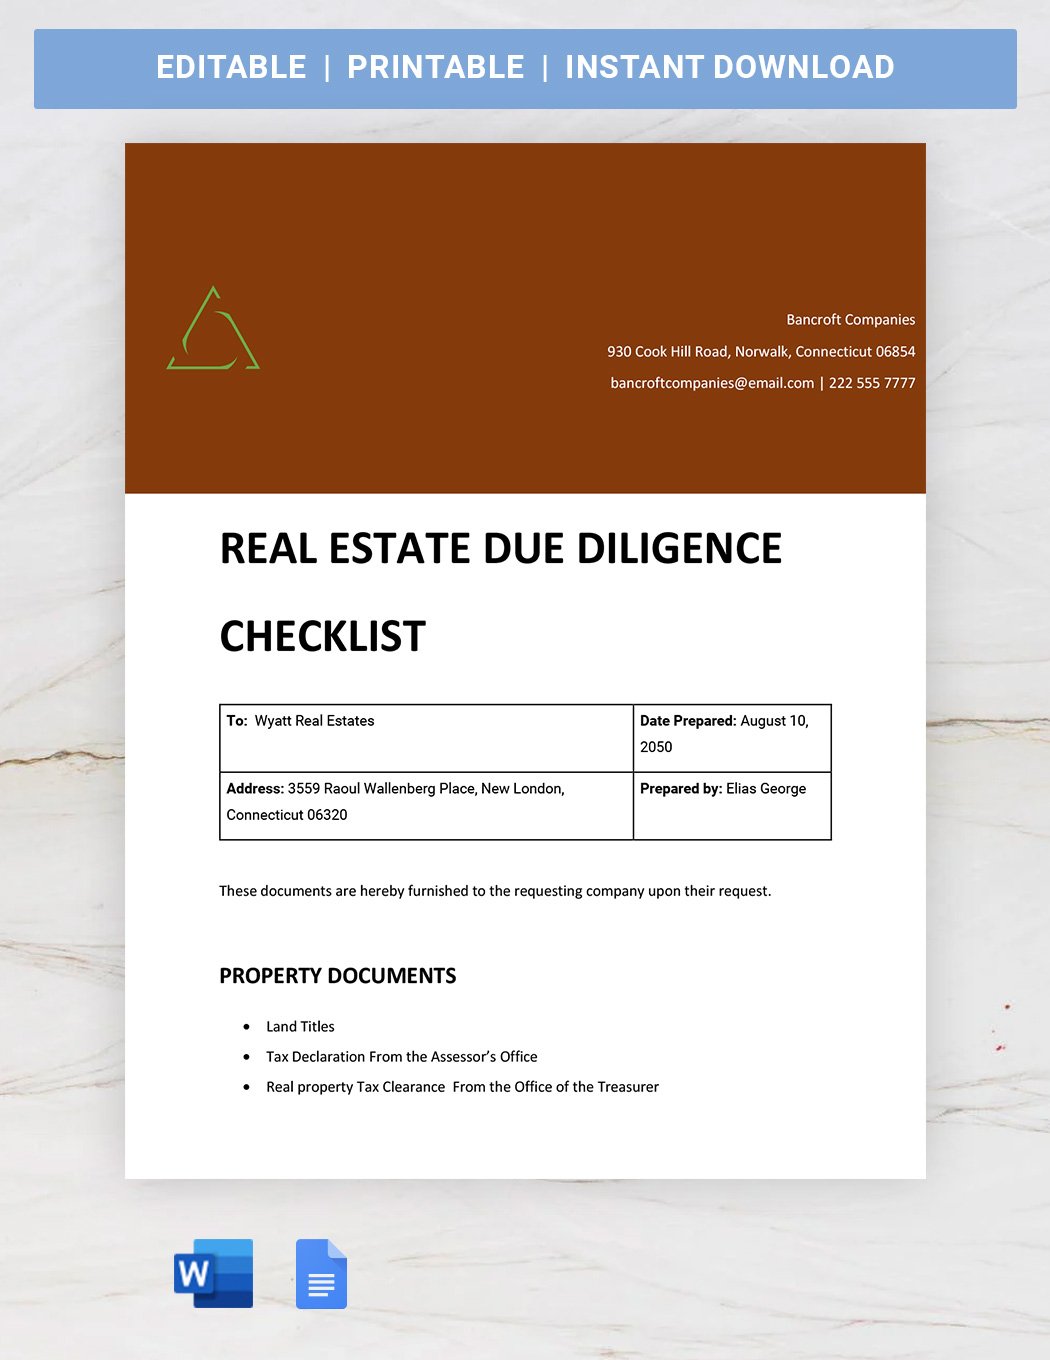 Real Estate Due Diligence Checklist  in Word, Google Docs